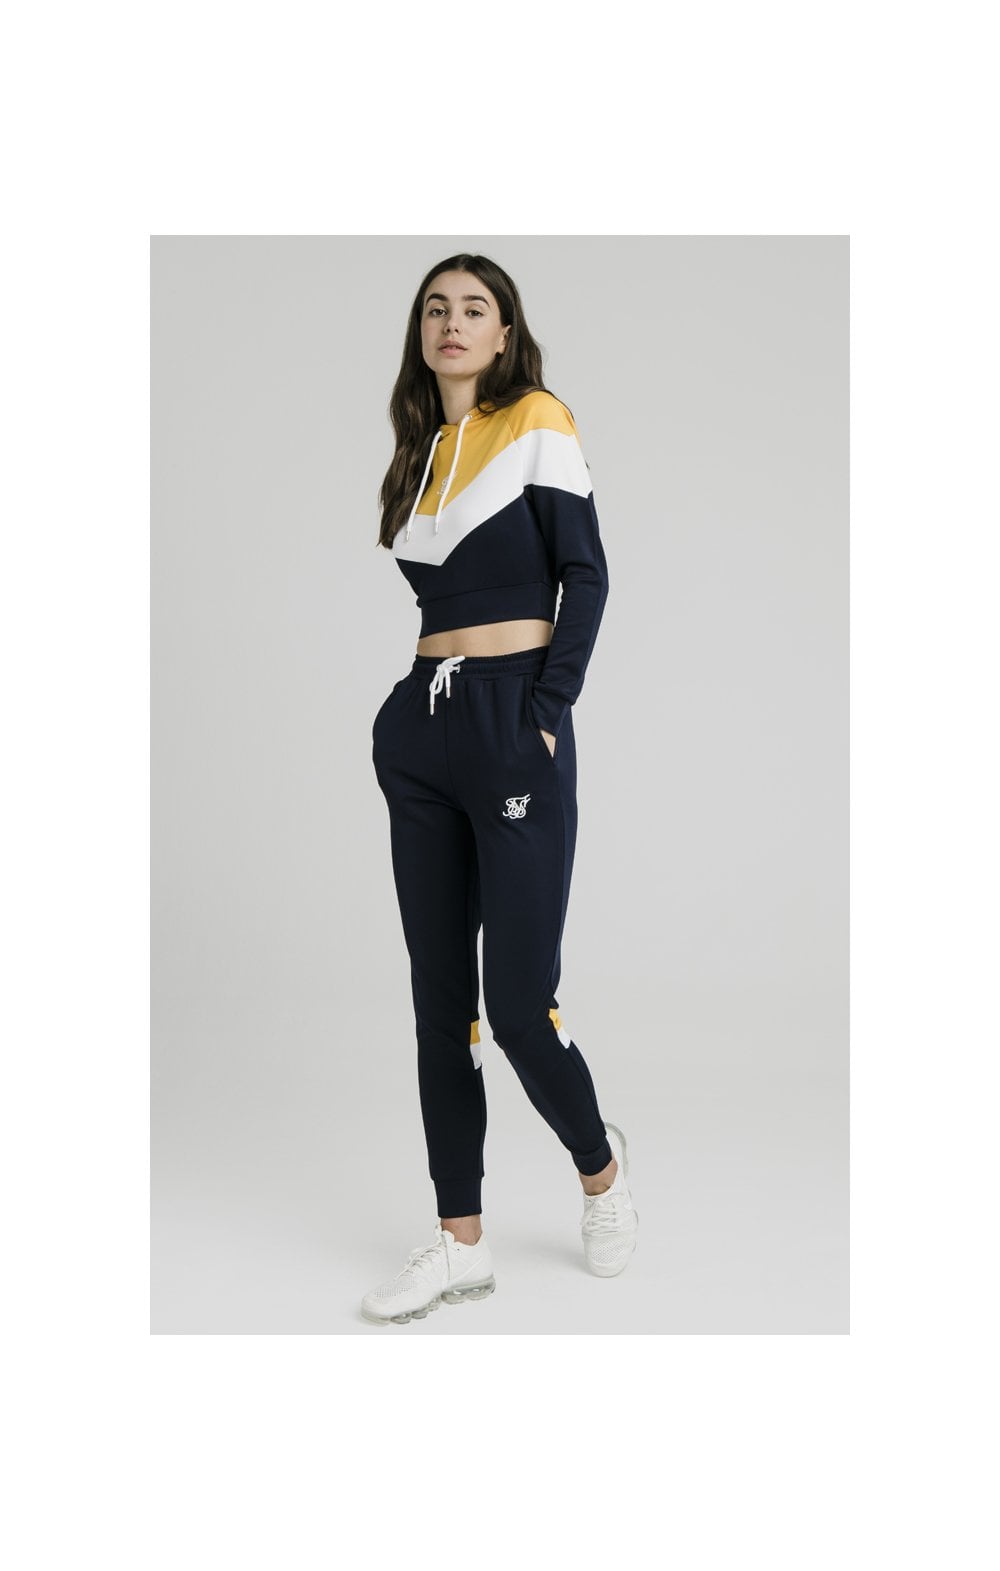 Load image into Gallery viewer, SikSilk Retro Sports Track Top - Peacoat (5)